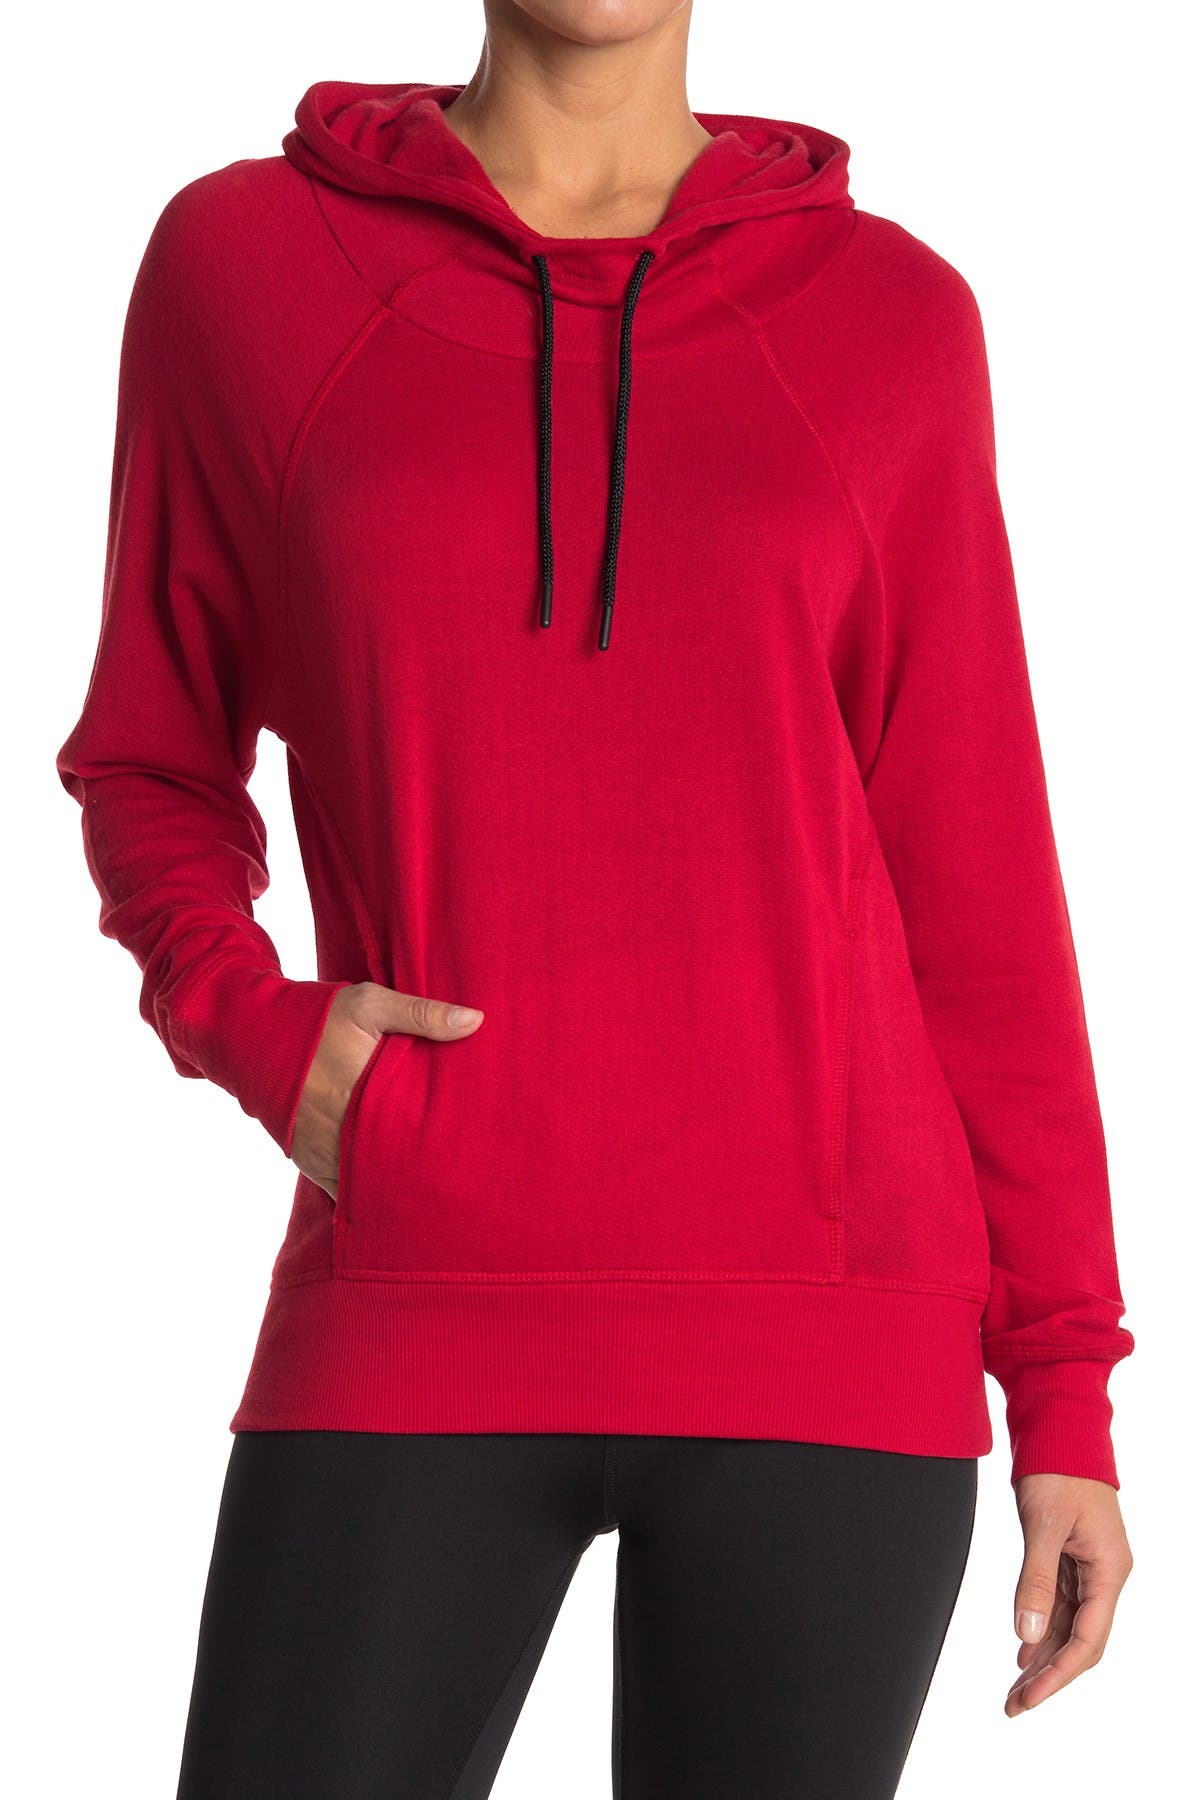 Z By Zella | Hall of Fame Hoodie | Nordstrom Rack